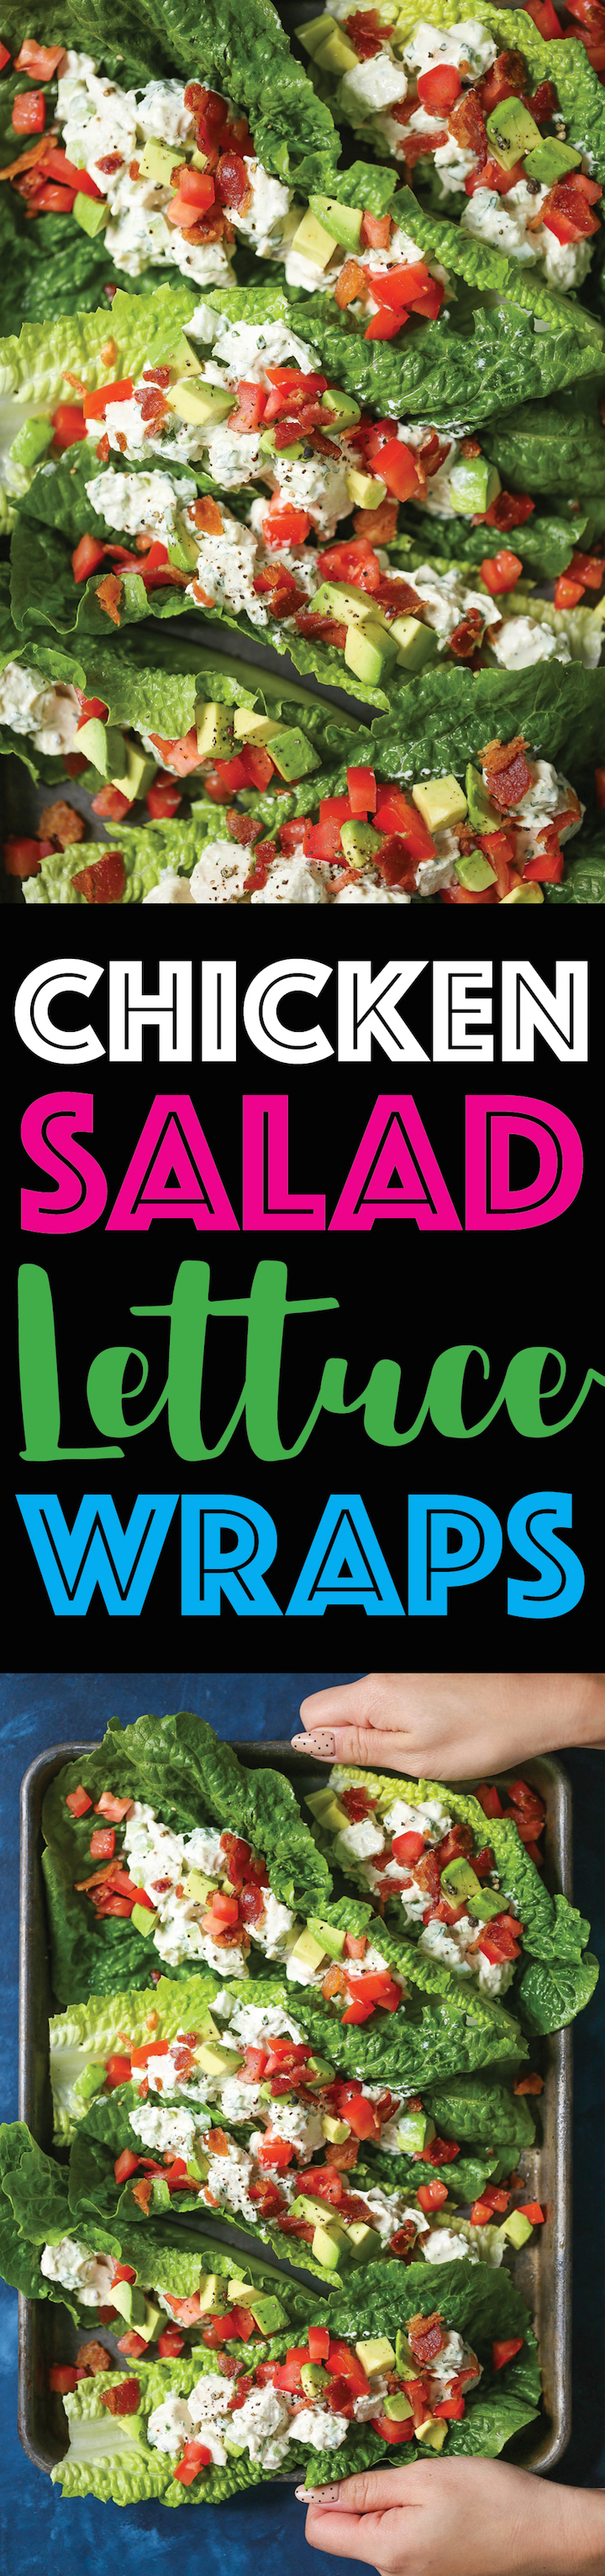 Chicken Salad Lettuce Wraps - Lighter, healthier and less carbs! We use Greek yogurt instead of mayonnaise and we top them into lettuce wraps instead of bread. LESS CALORIES yet same amazing taste. You won't notice a difference, except your smaller waistline!